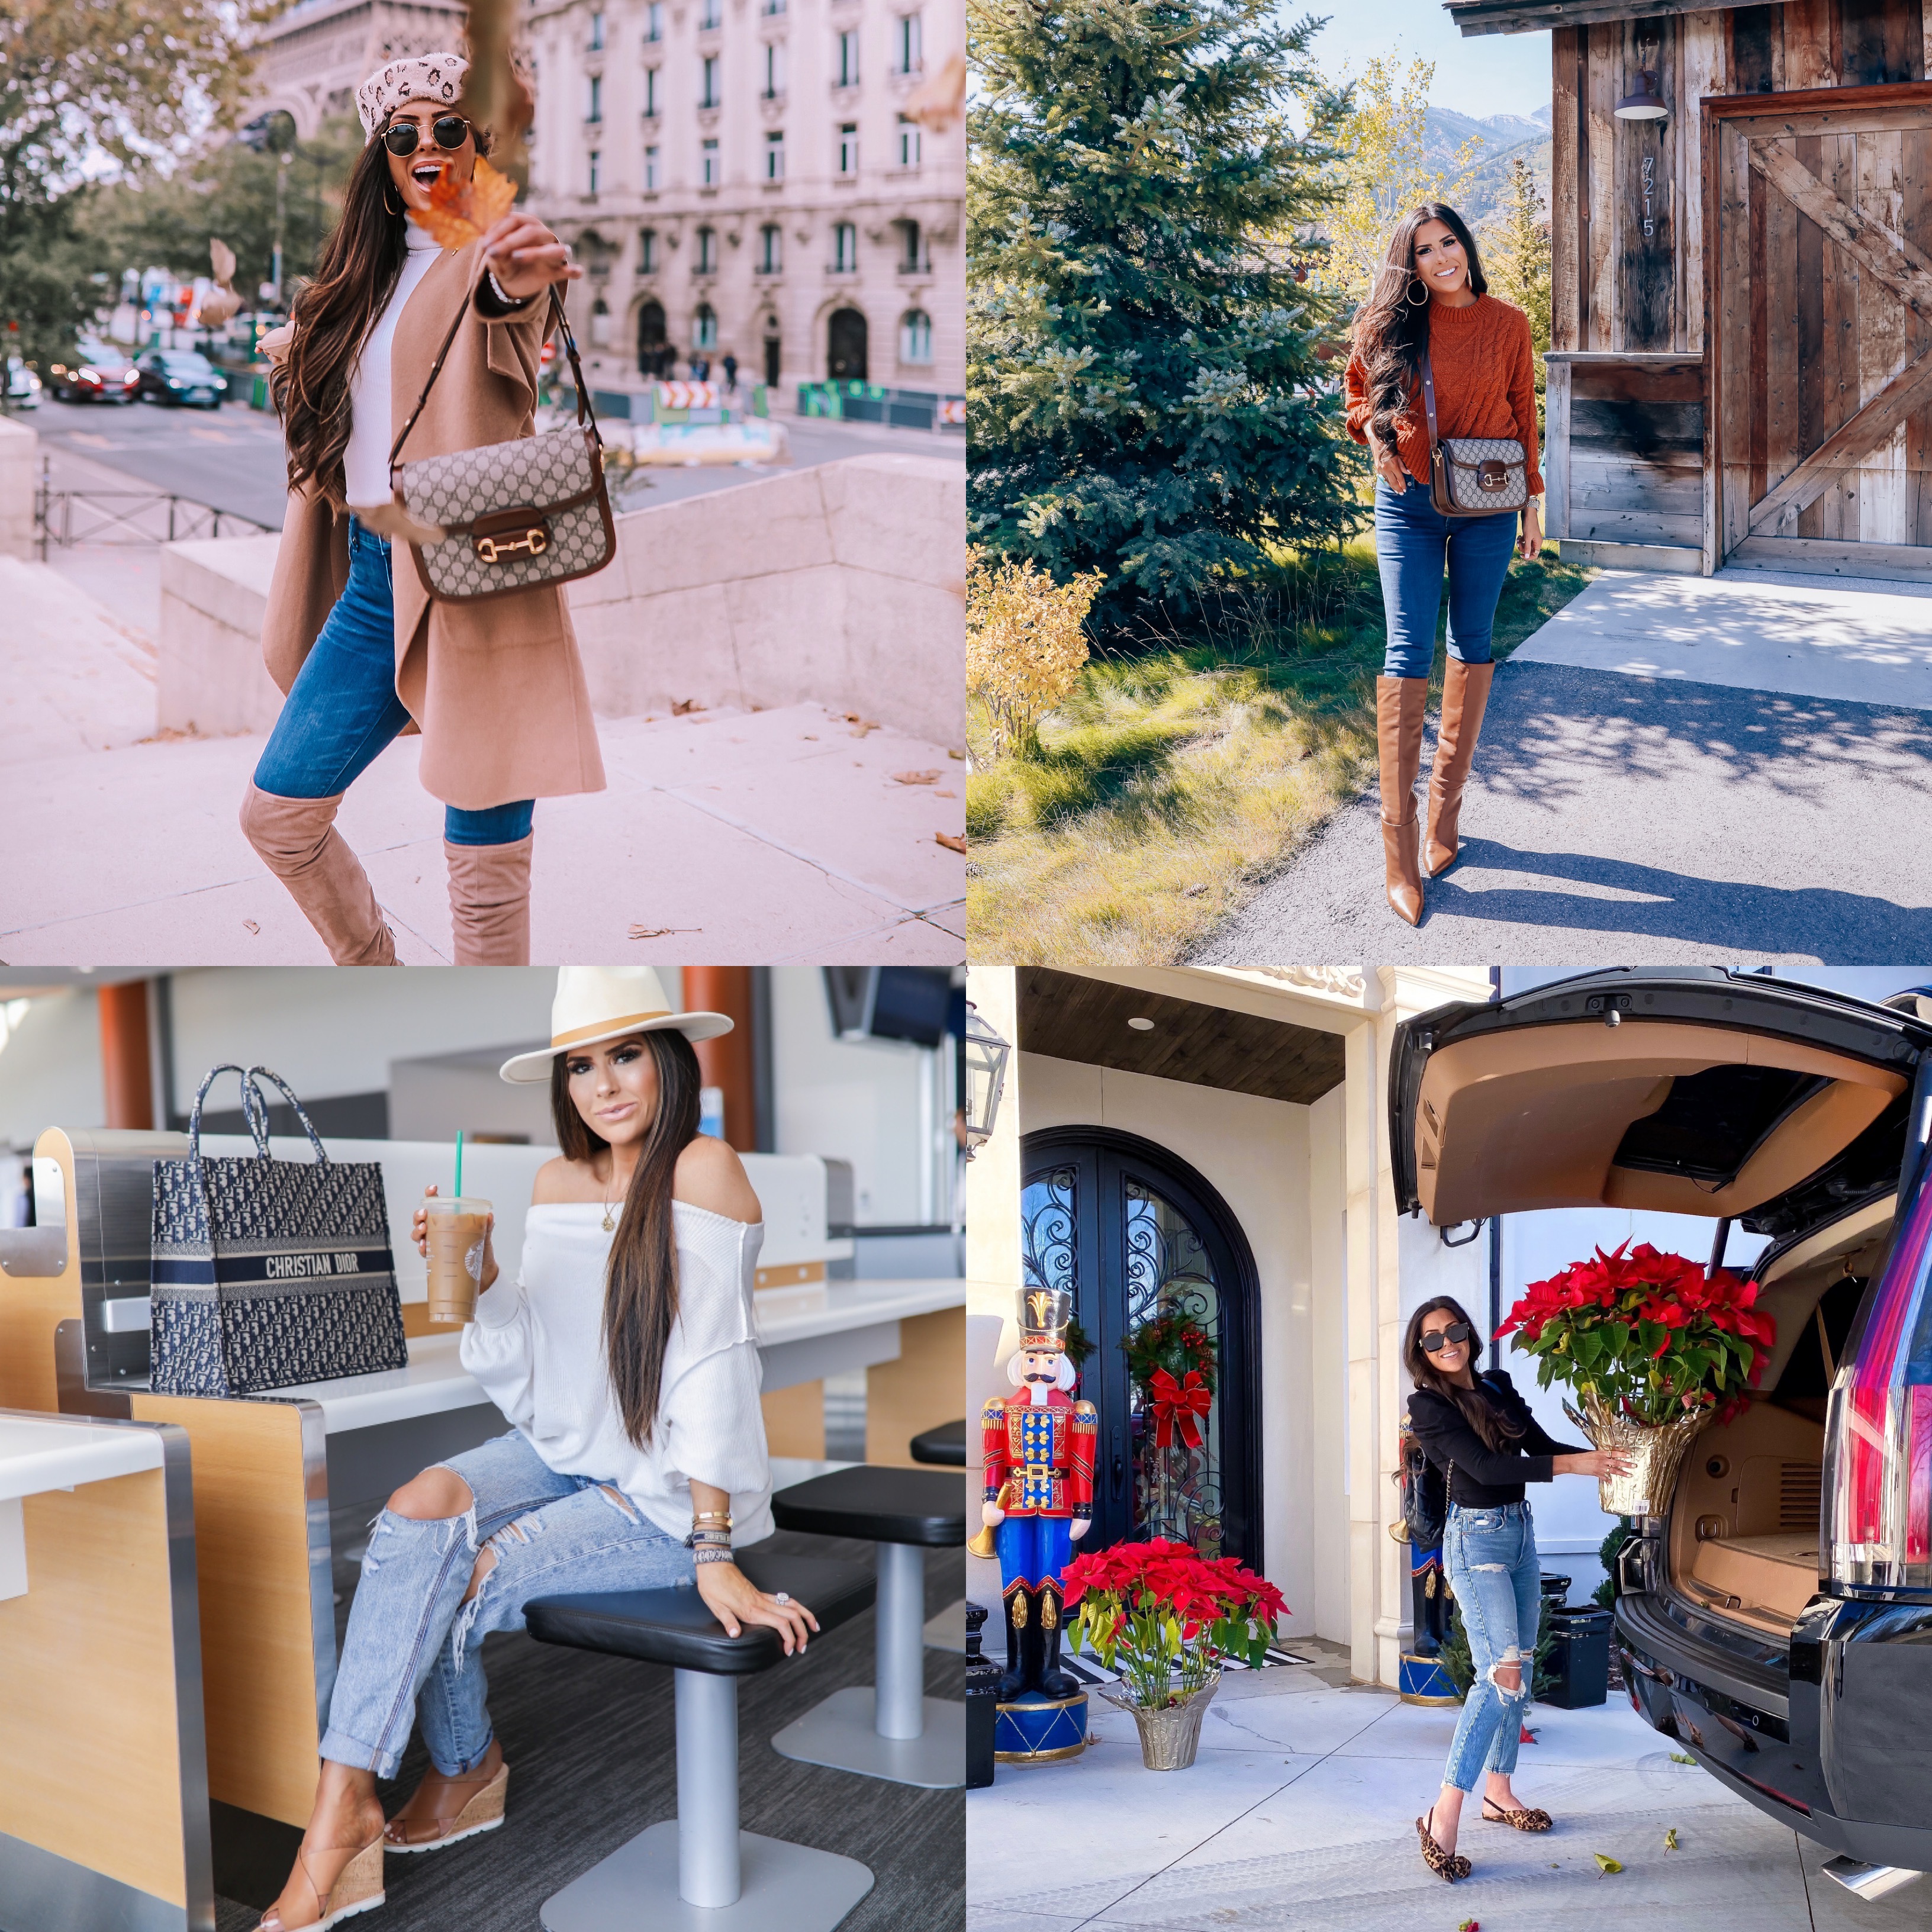 best denim of 2019, top affordable denim brands, emily | best athletic leggings lululemon, zella, spanx review | Best Wardrobe Essentials 2019👖 | Part 2 by popular US fashion blog, The Sweetest Thing: collage image of a woman wearing Express jeans and Abercrombie and Fitch High Rise Mom Jeans.